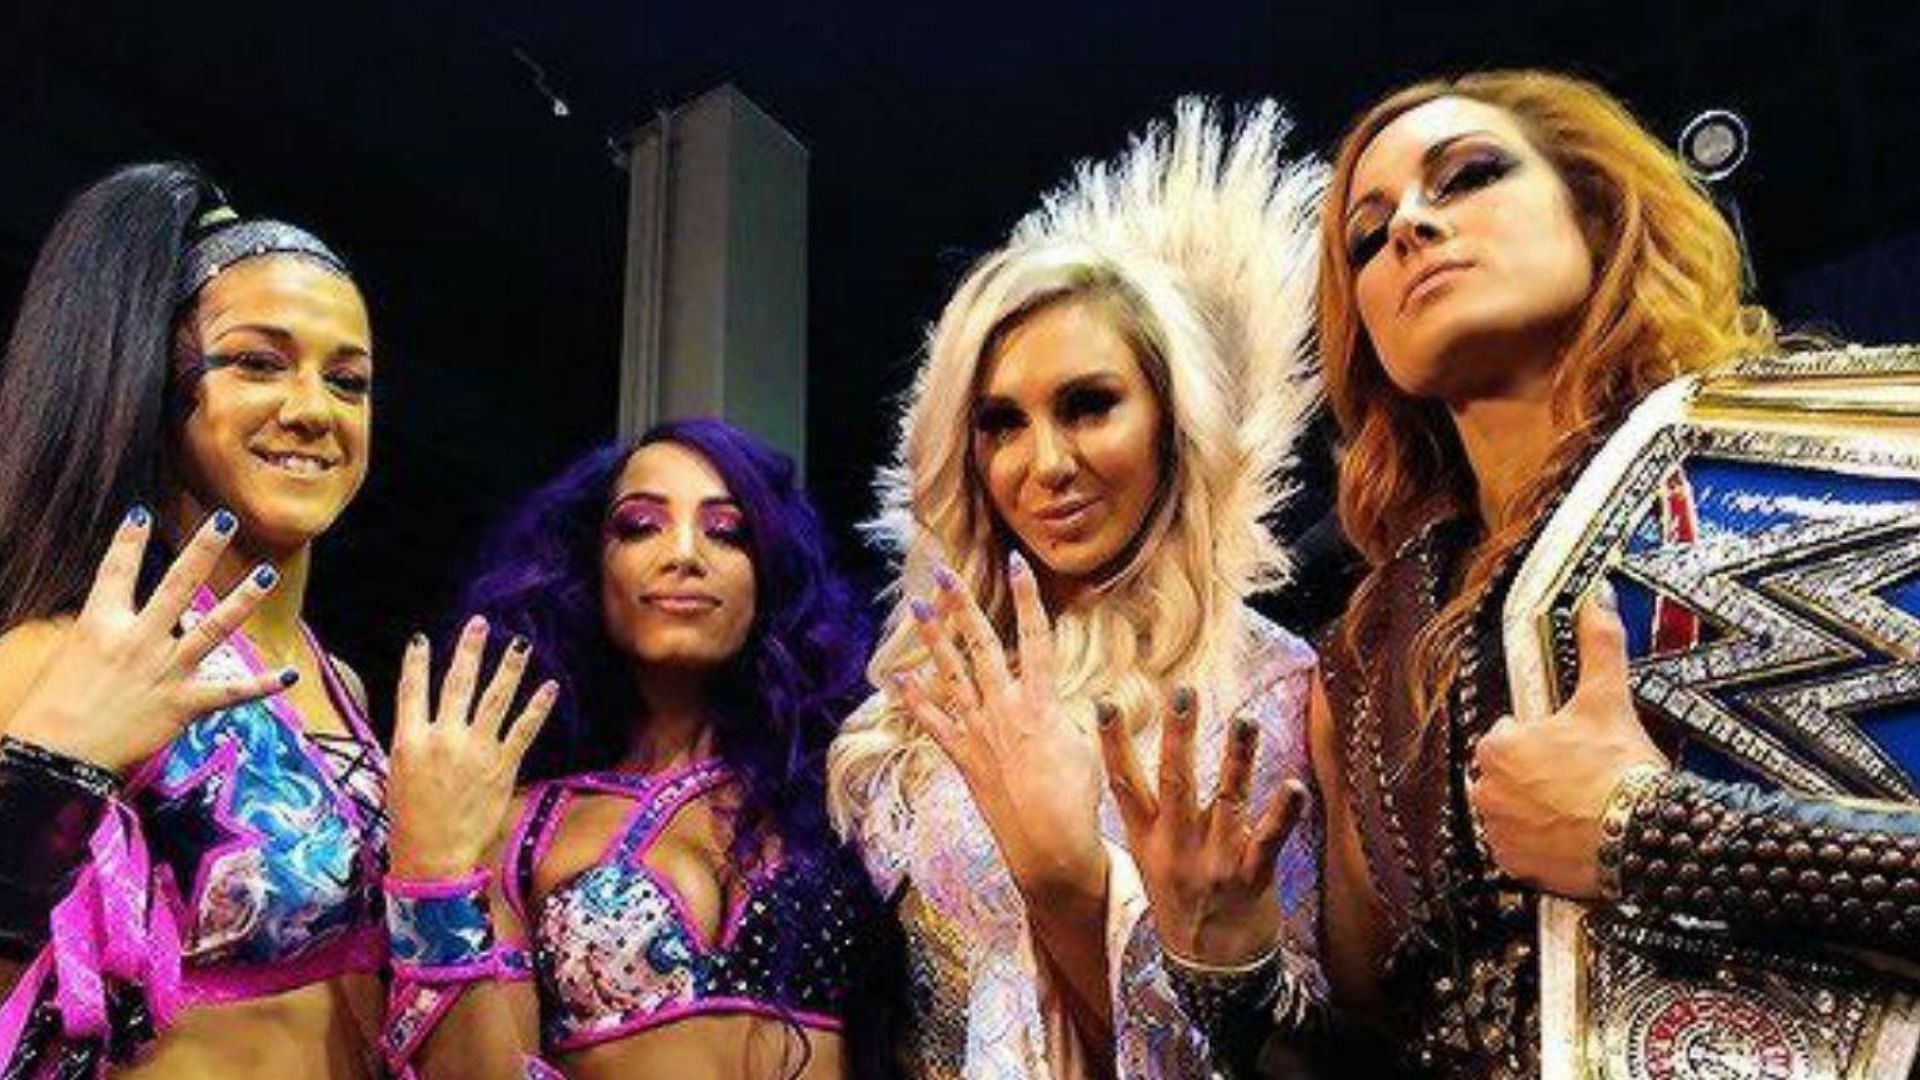 Becky Lynch, Charlotte Flair, Merecedes Mon&eacute; (fka Sasha Banks) and Bayley are known as The Four Horsewomen of WWE